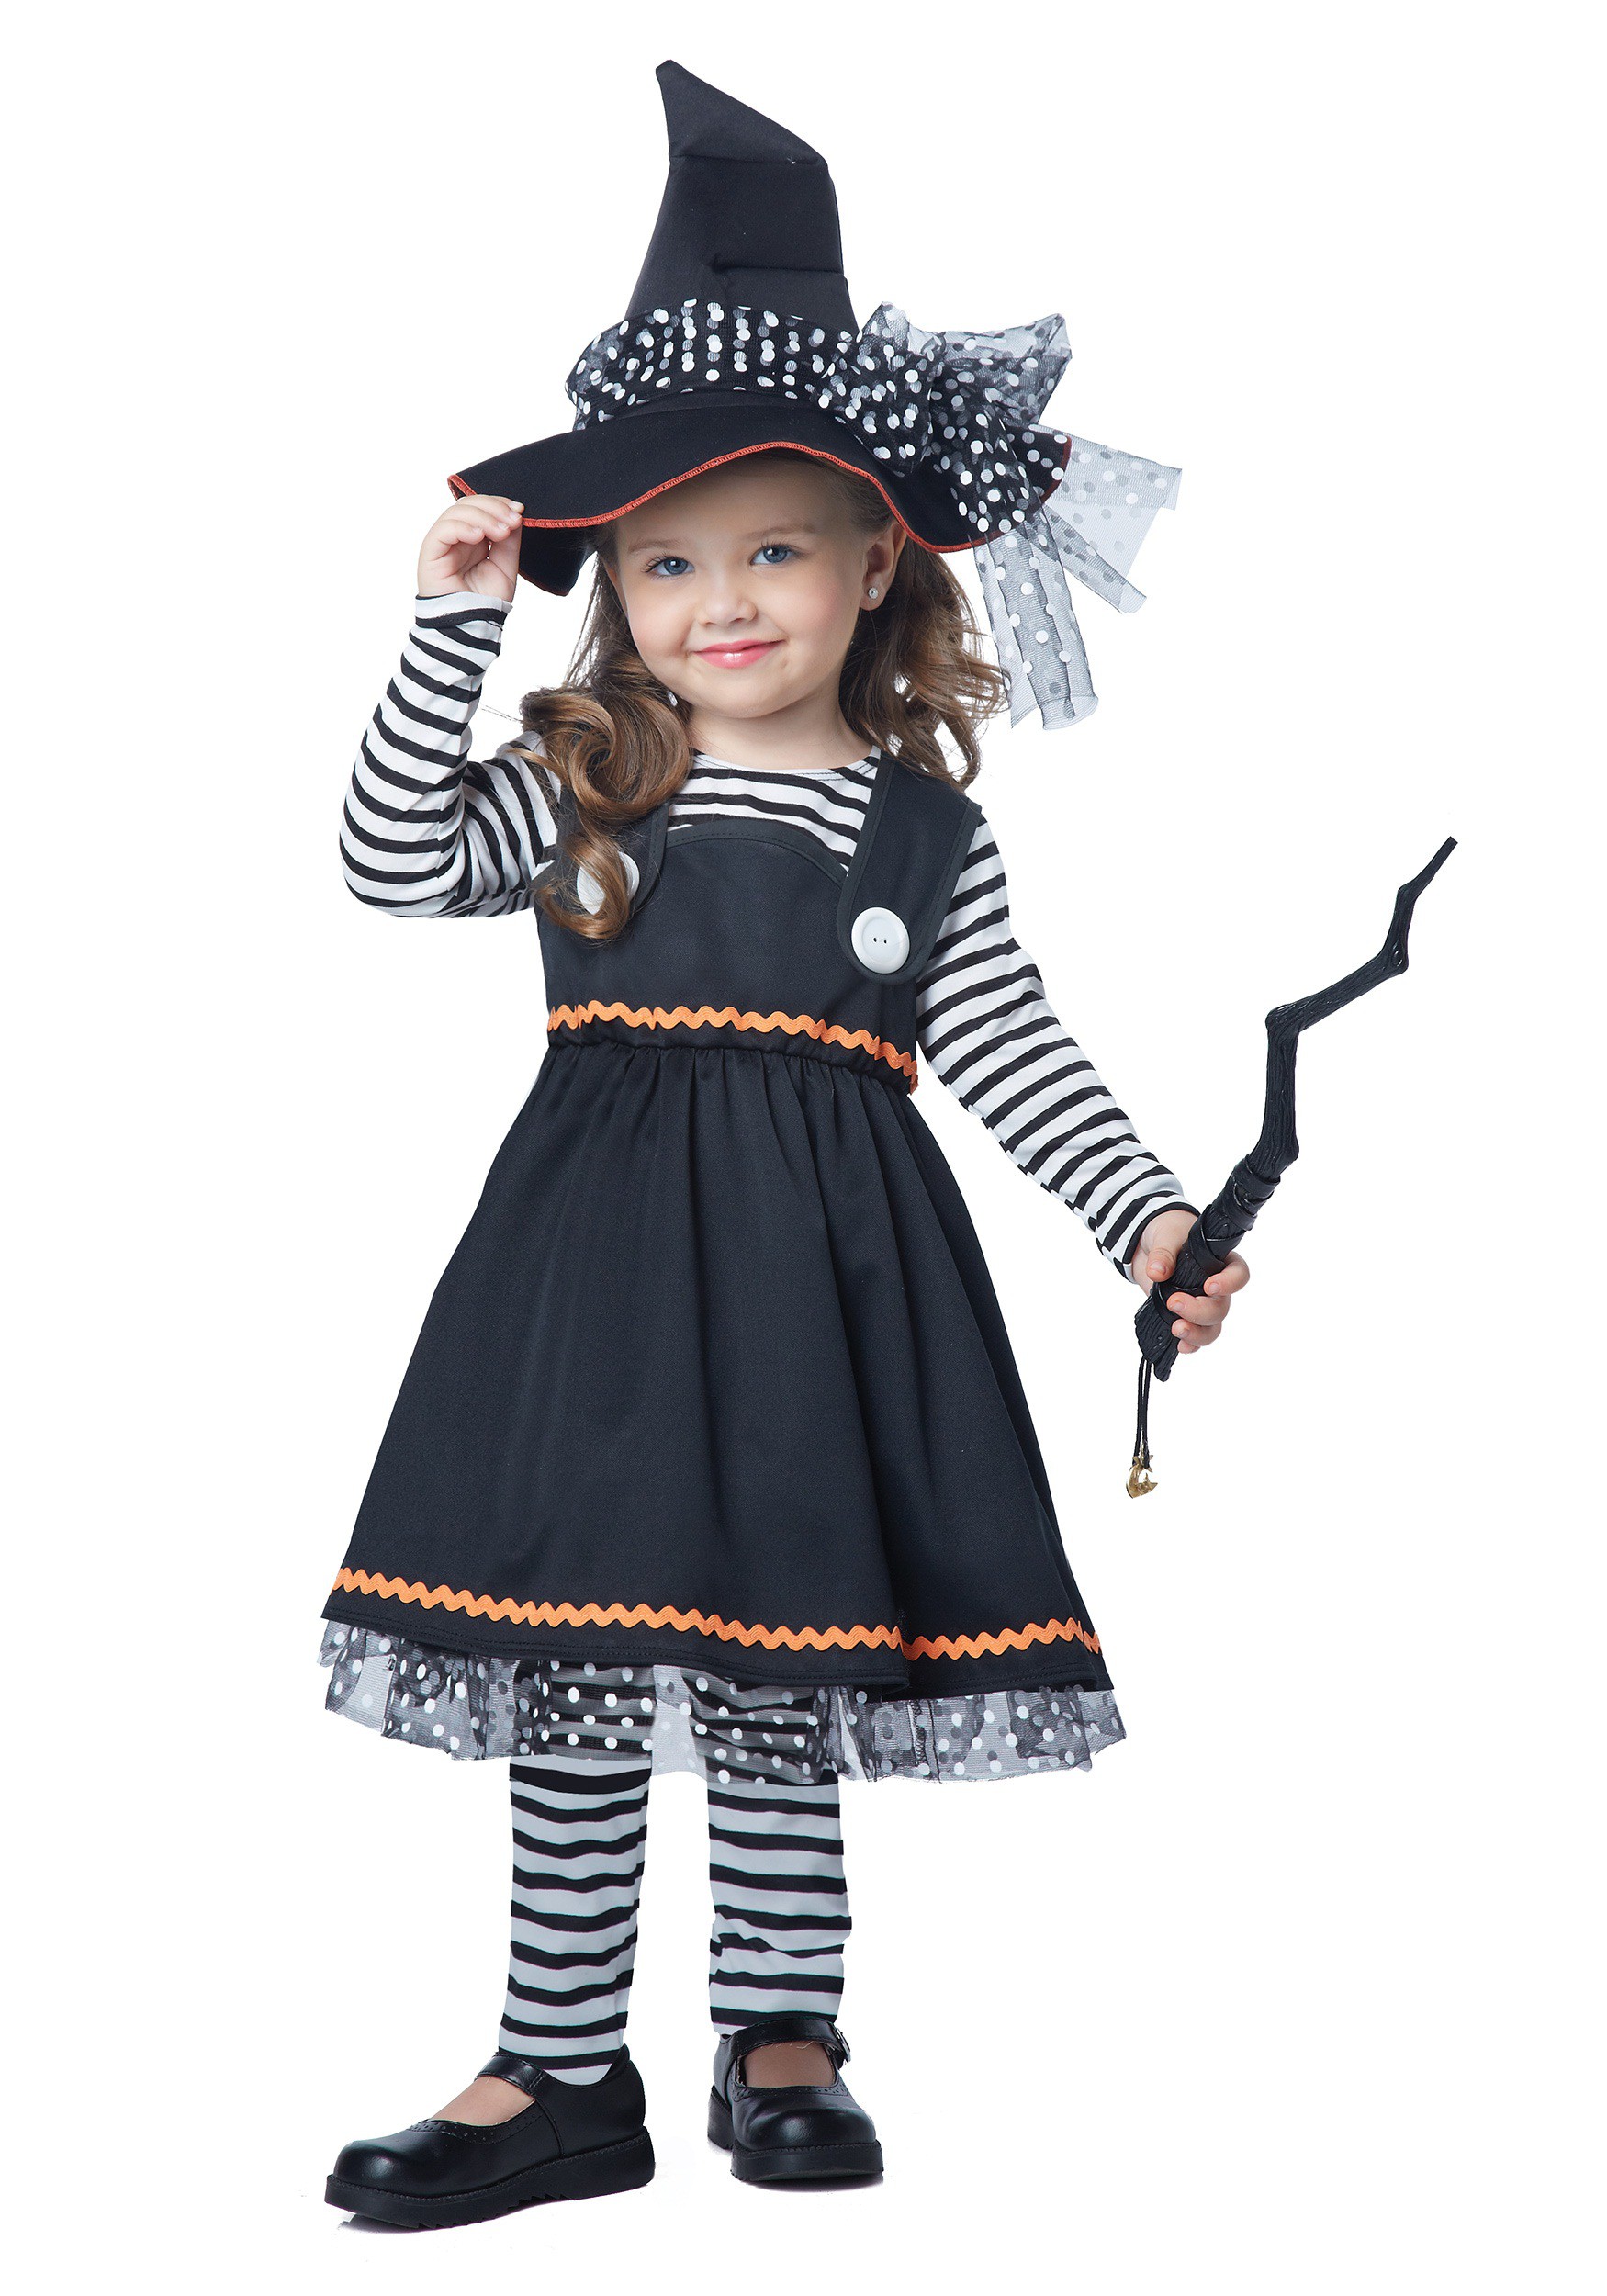 Photos - Fancy Dress California Costume Collection Crafty Little Witch Girl's Toddler Costume |